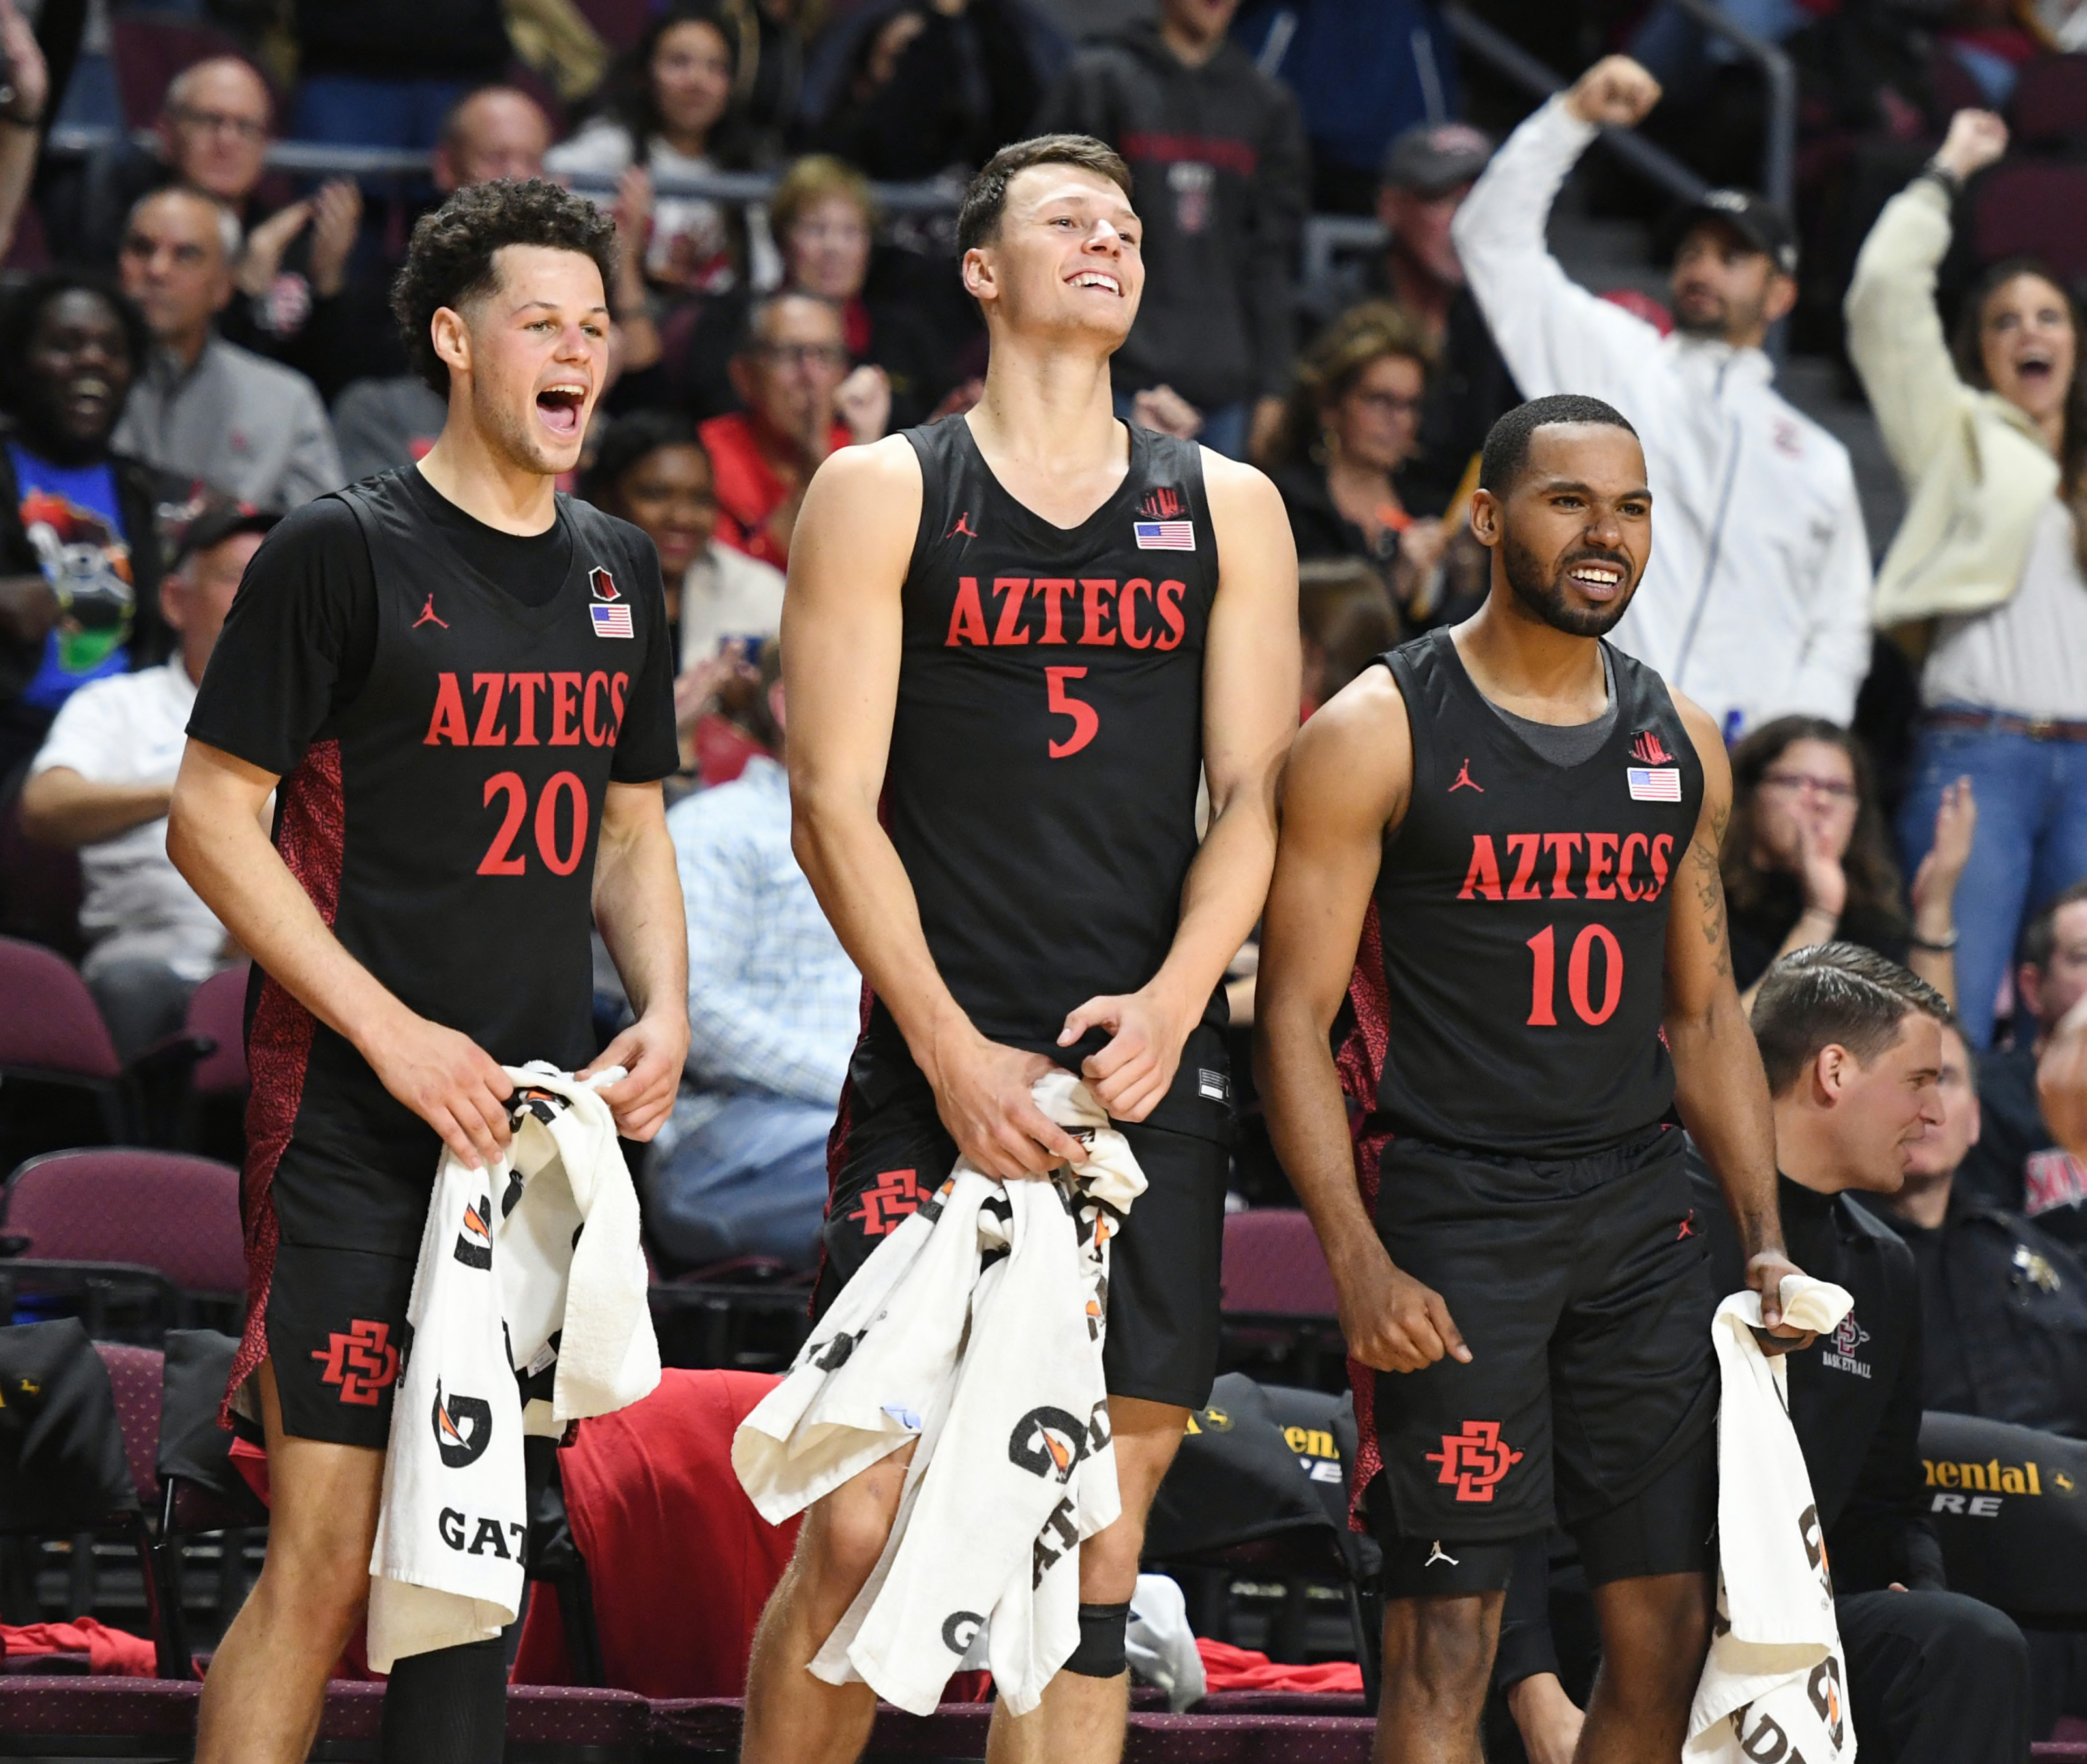 San Diego State Basketball Making or breaking March to 2020 Final Four